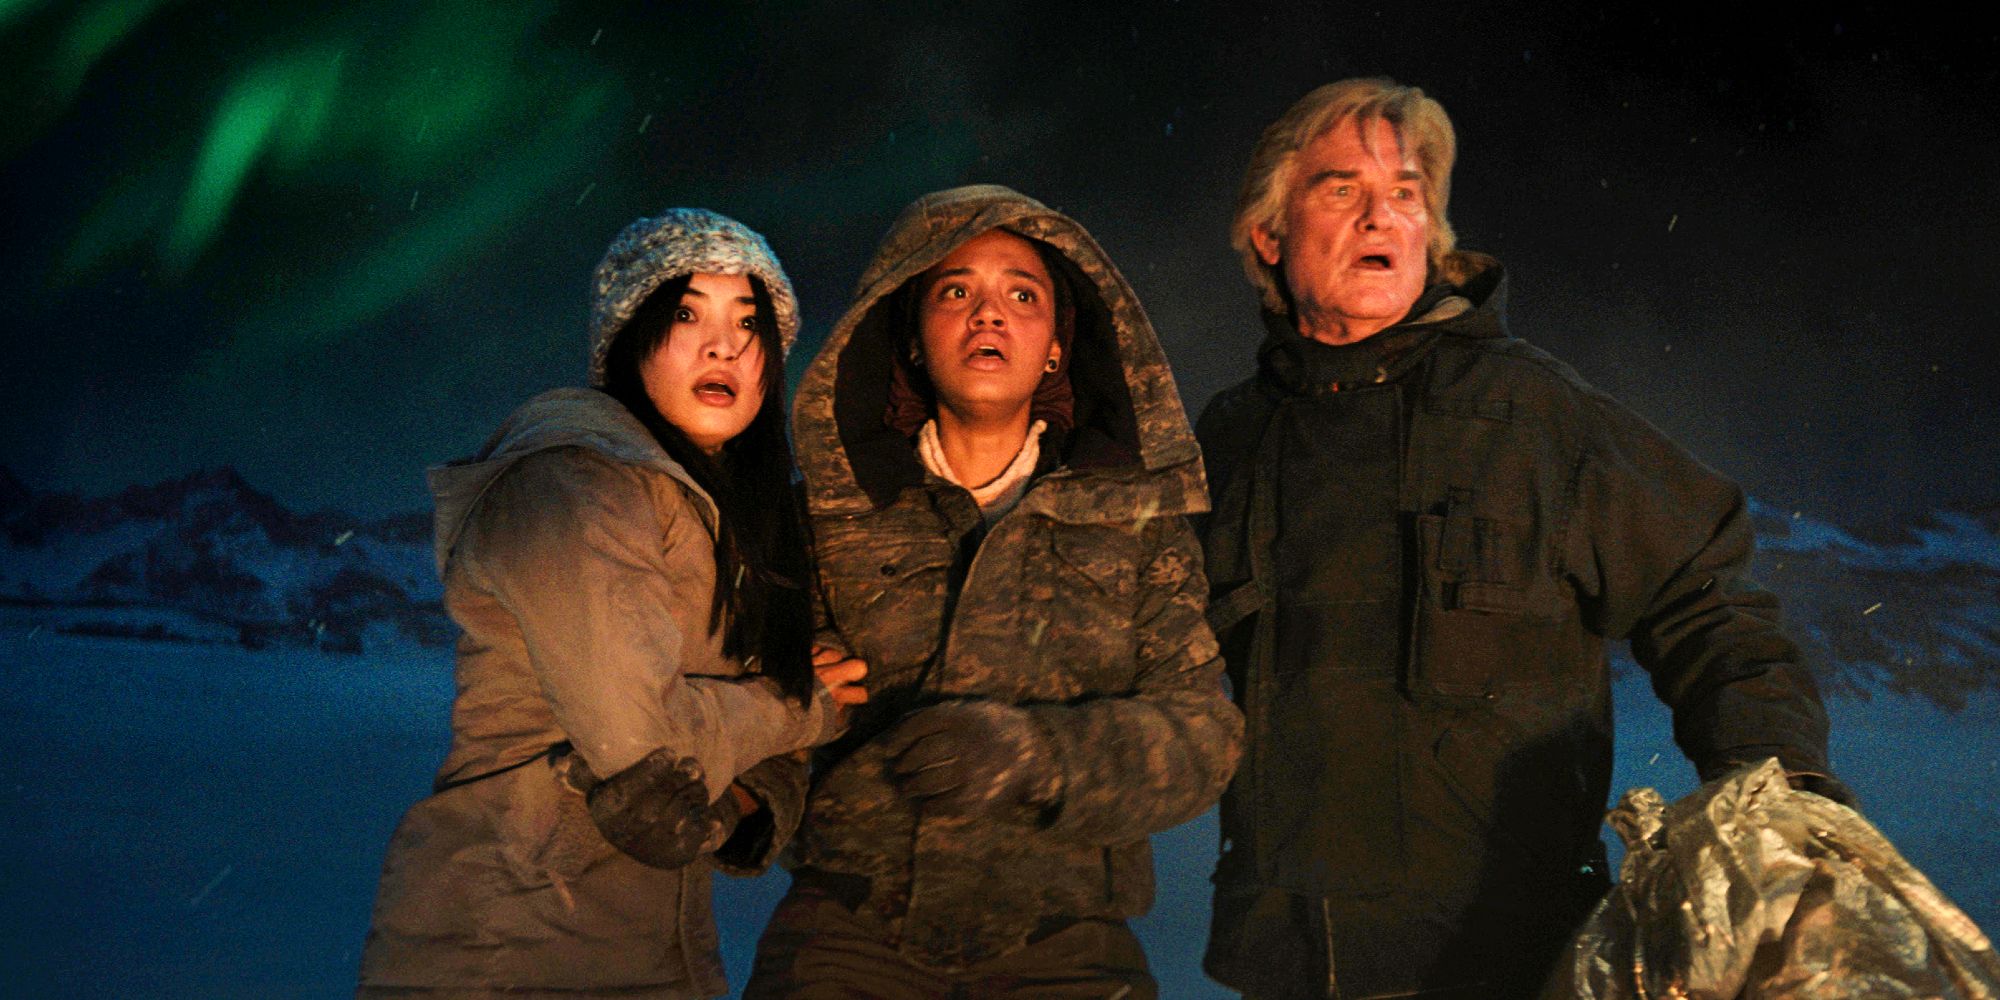 Monarch Legacy of Monsters characters looking scared with northern lights behind them